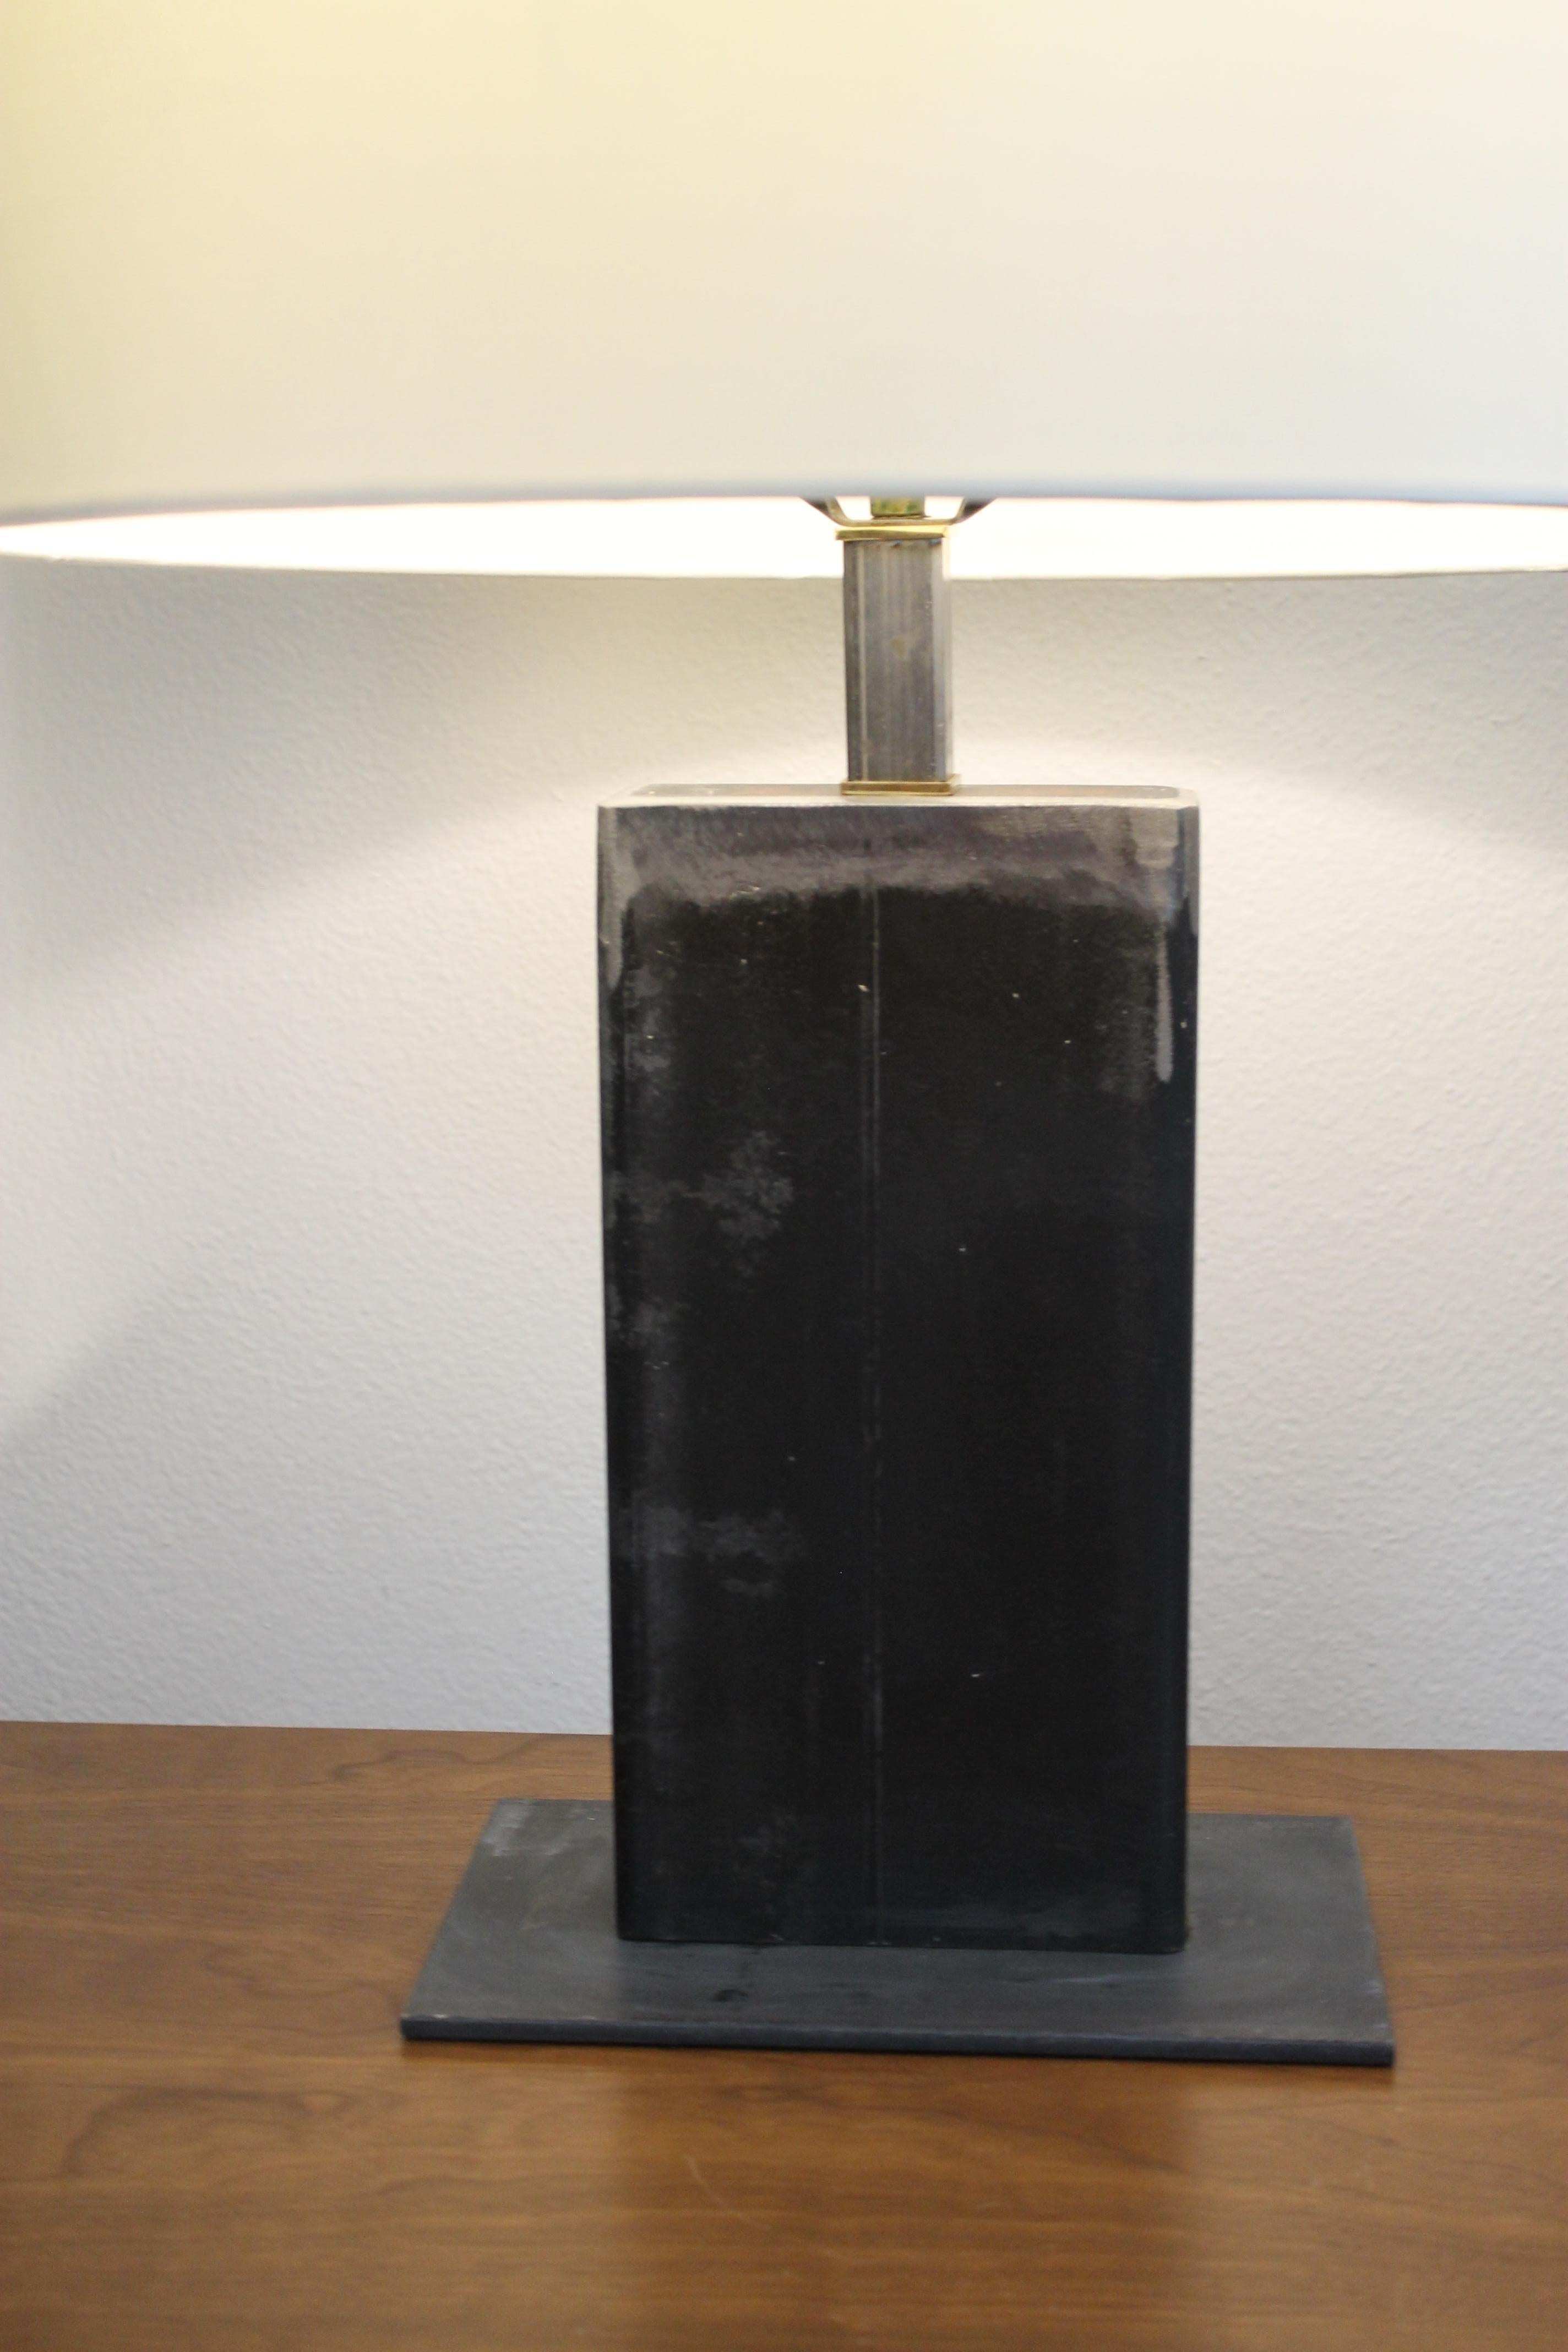 Contemporary studio designed rectangular steel table lamp. We left the lamp in its raw unpolished state. We have 3 table lamps listed and this is the smallest size. Base is 10